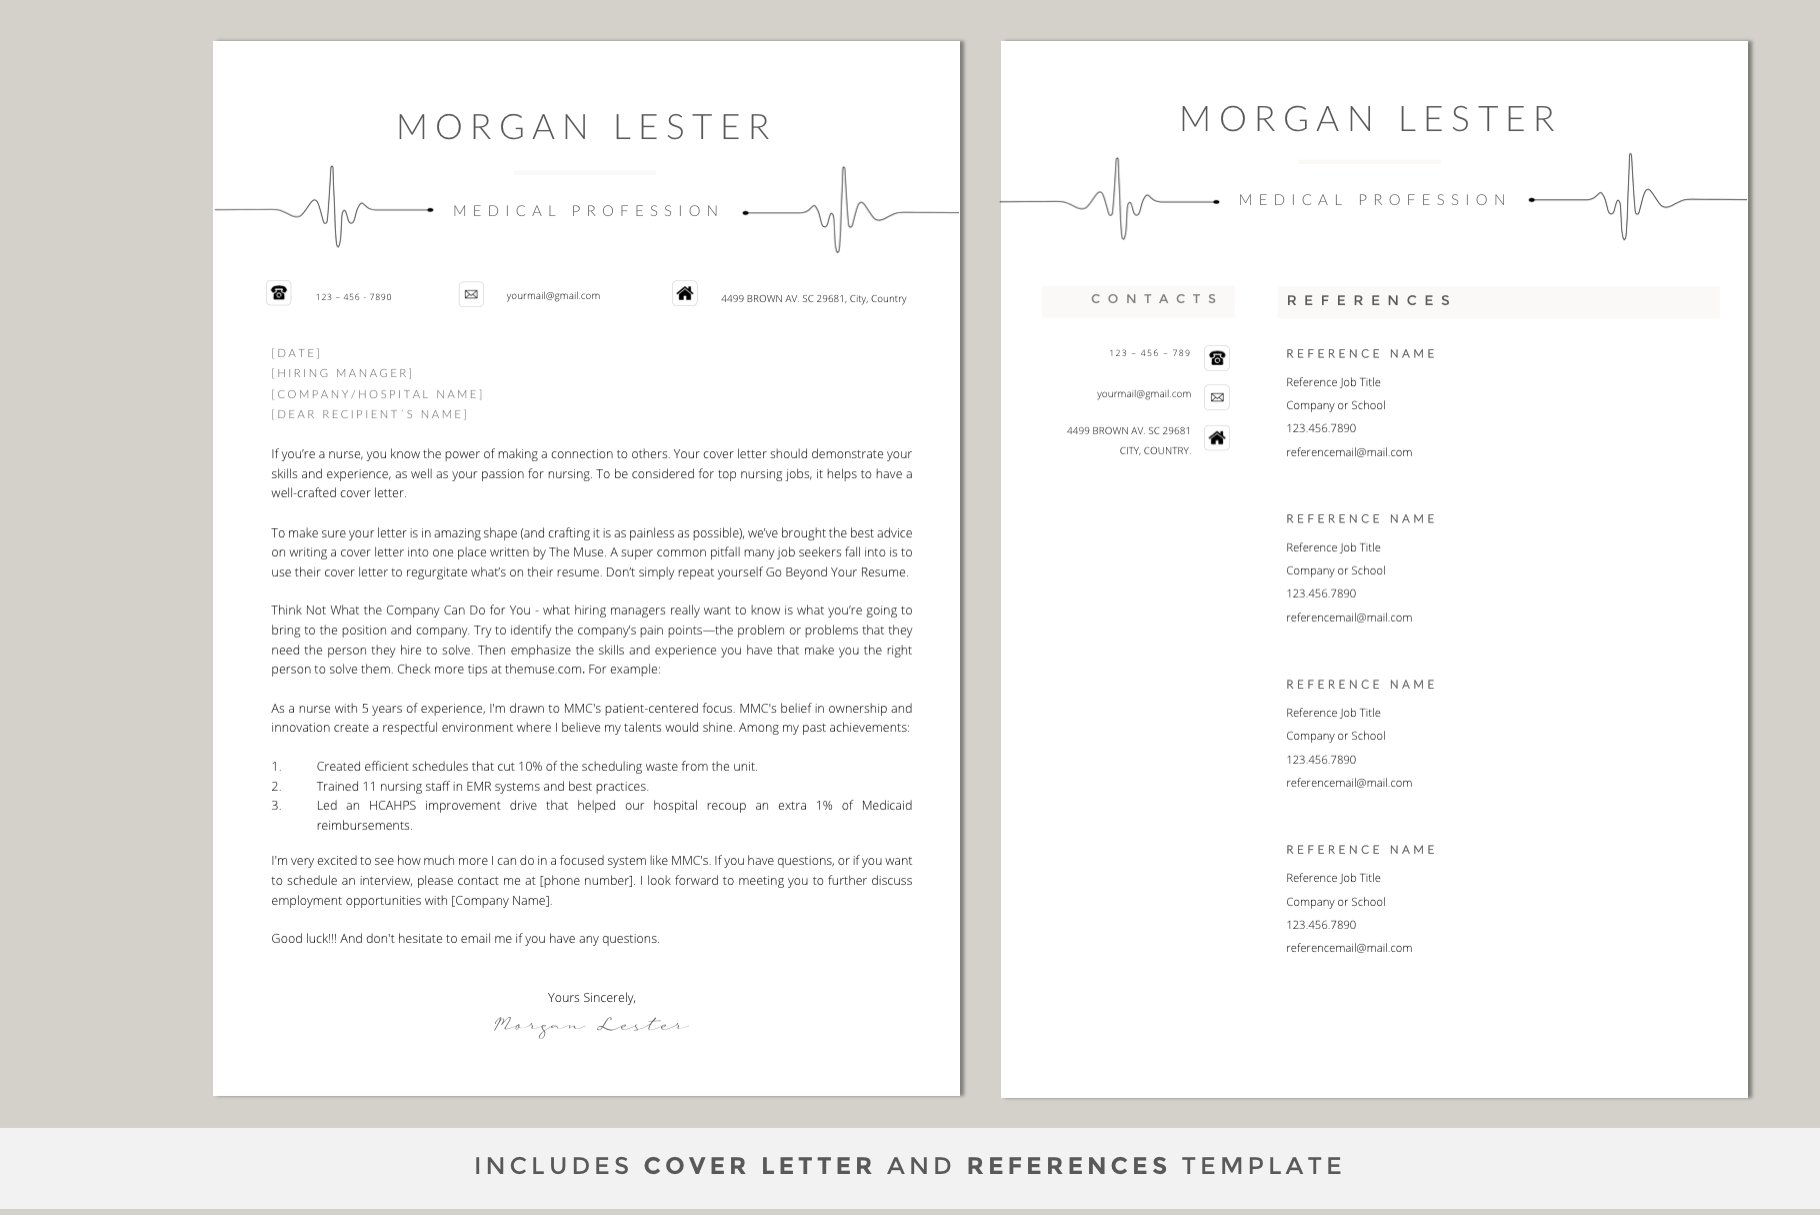 Professional resume template for a medical professional.